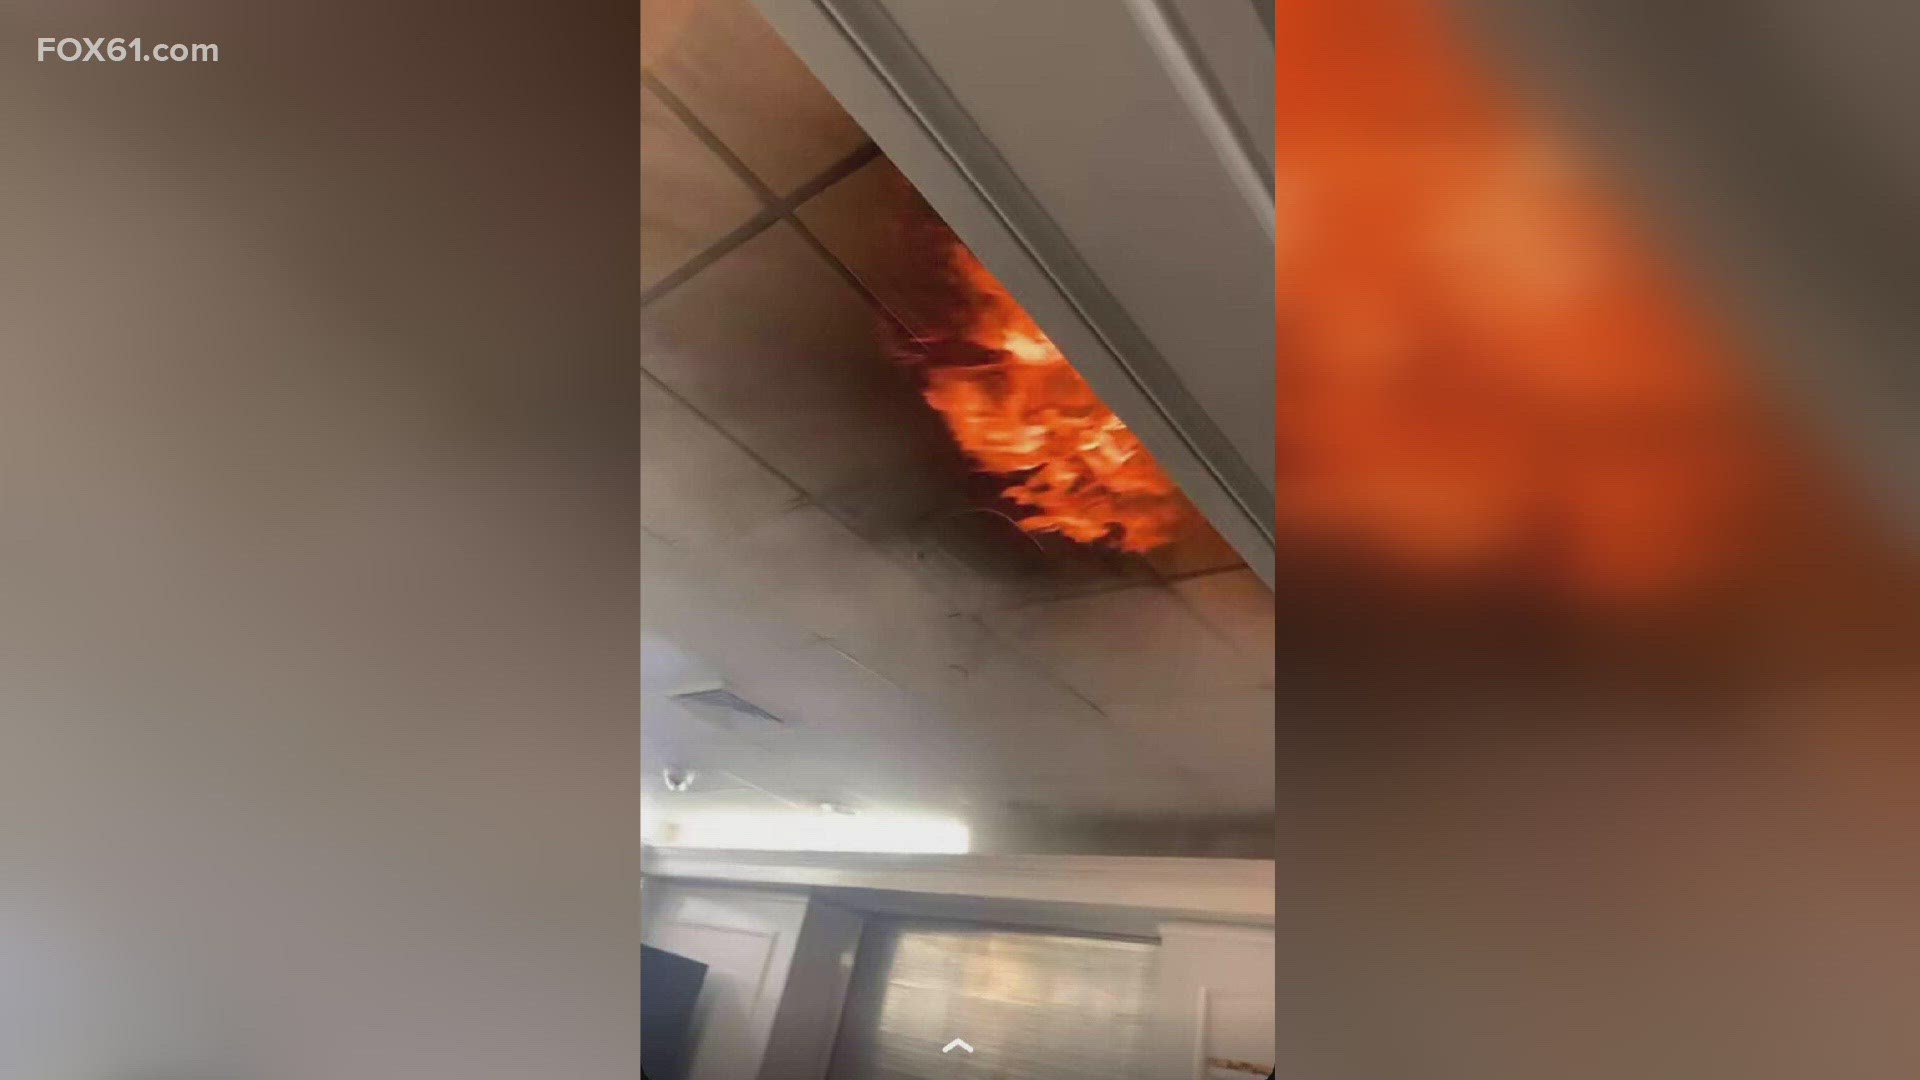 No one was hurt after multiple trained students pulled the fire alarms and alerted others in the residence to the situation, the university said.